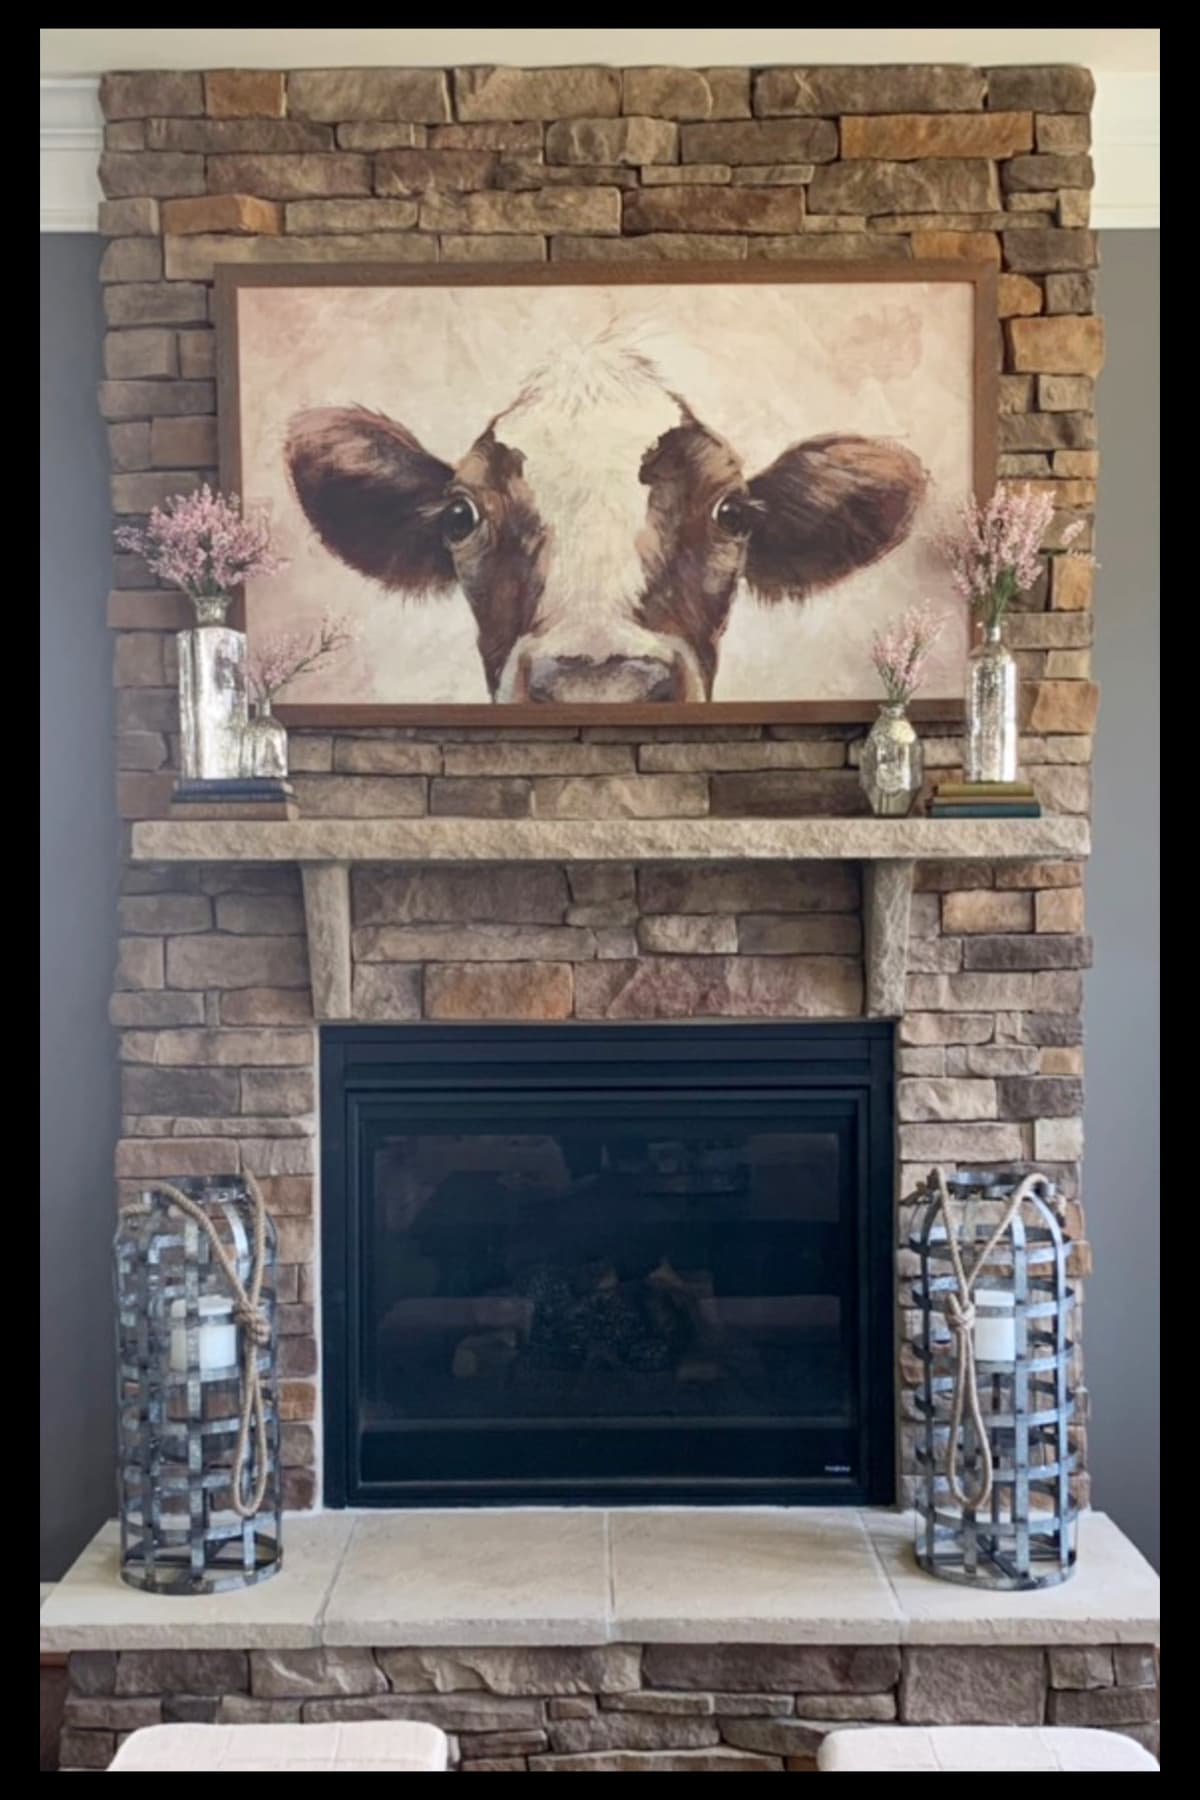 farmhouse fireplace ideas with cow picture on wall, candles on hearth and rustic decor on mantel